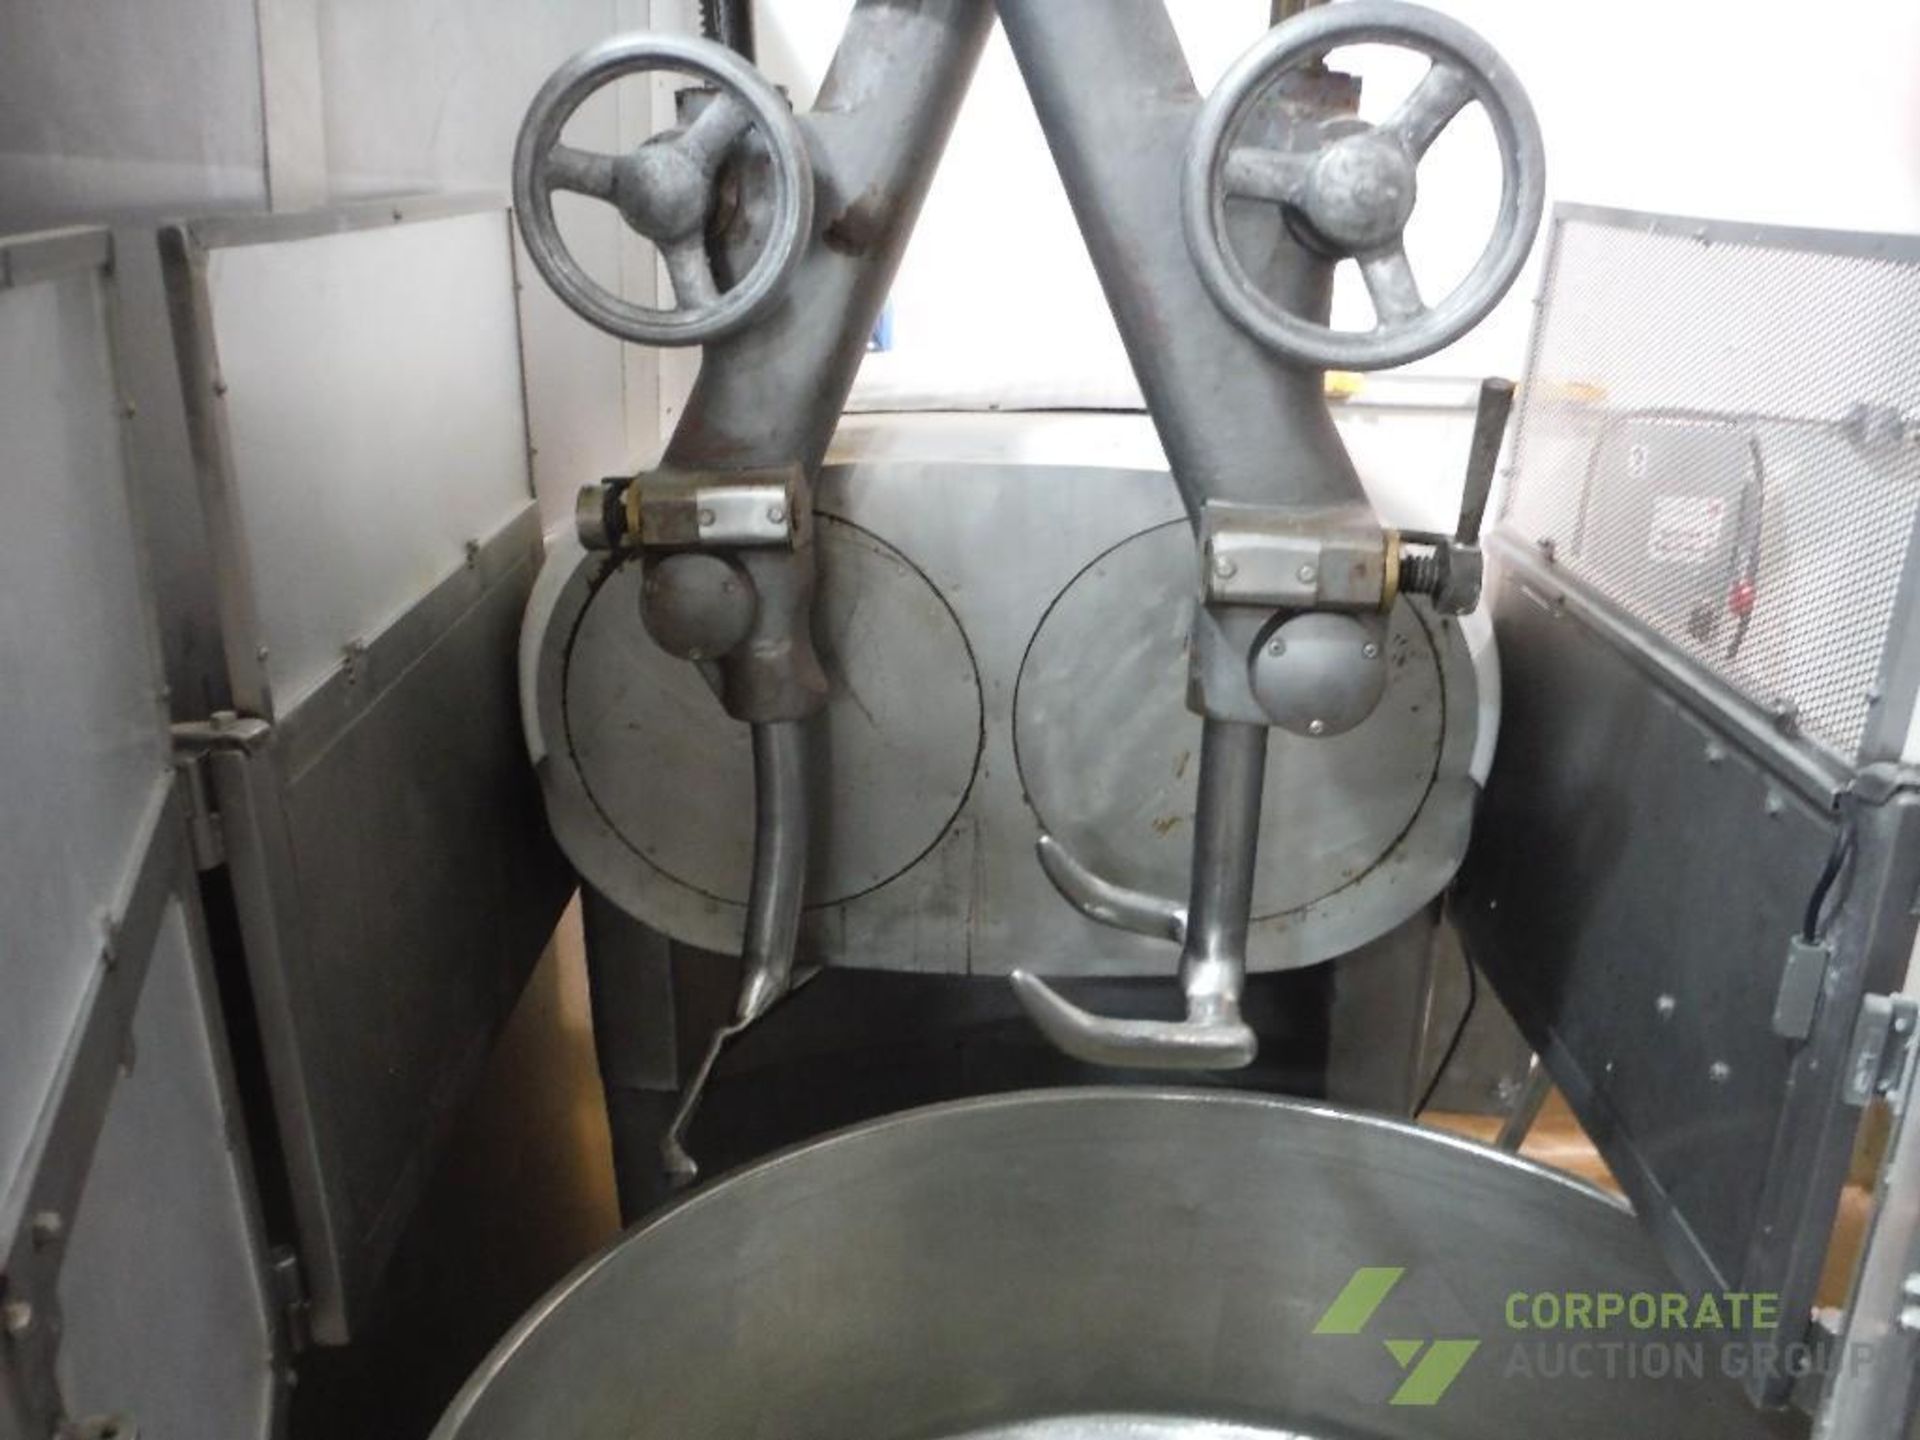 Colborne double arm mixer, Model DM530, SN 206-90, with SS mix bowl and cart, 44 in. dia. - Image 3 of 8